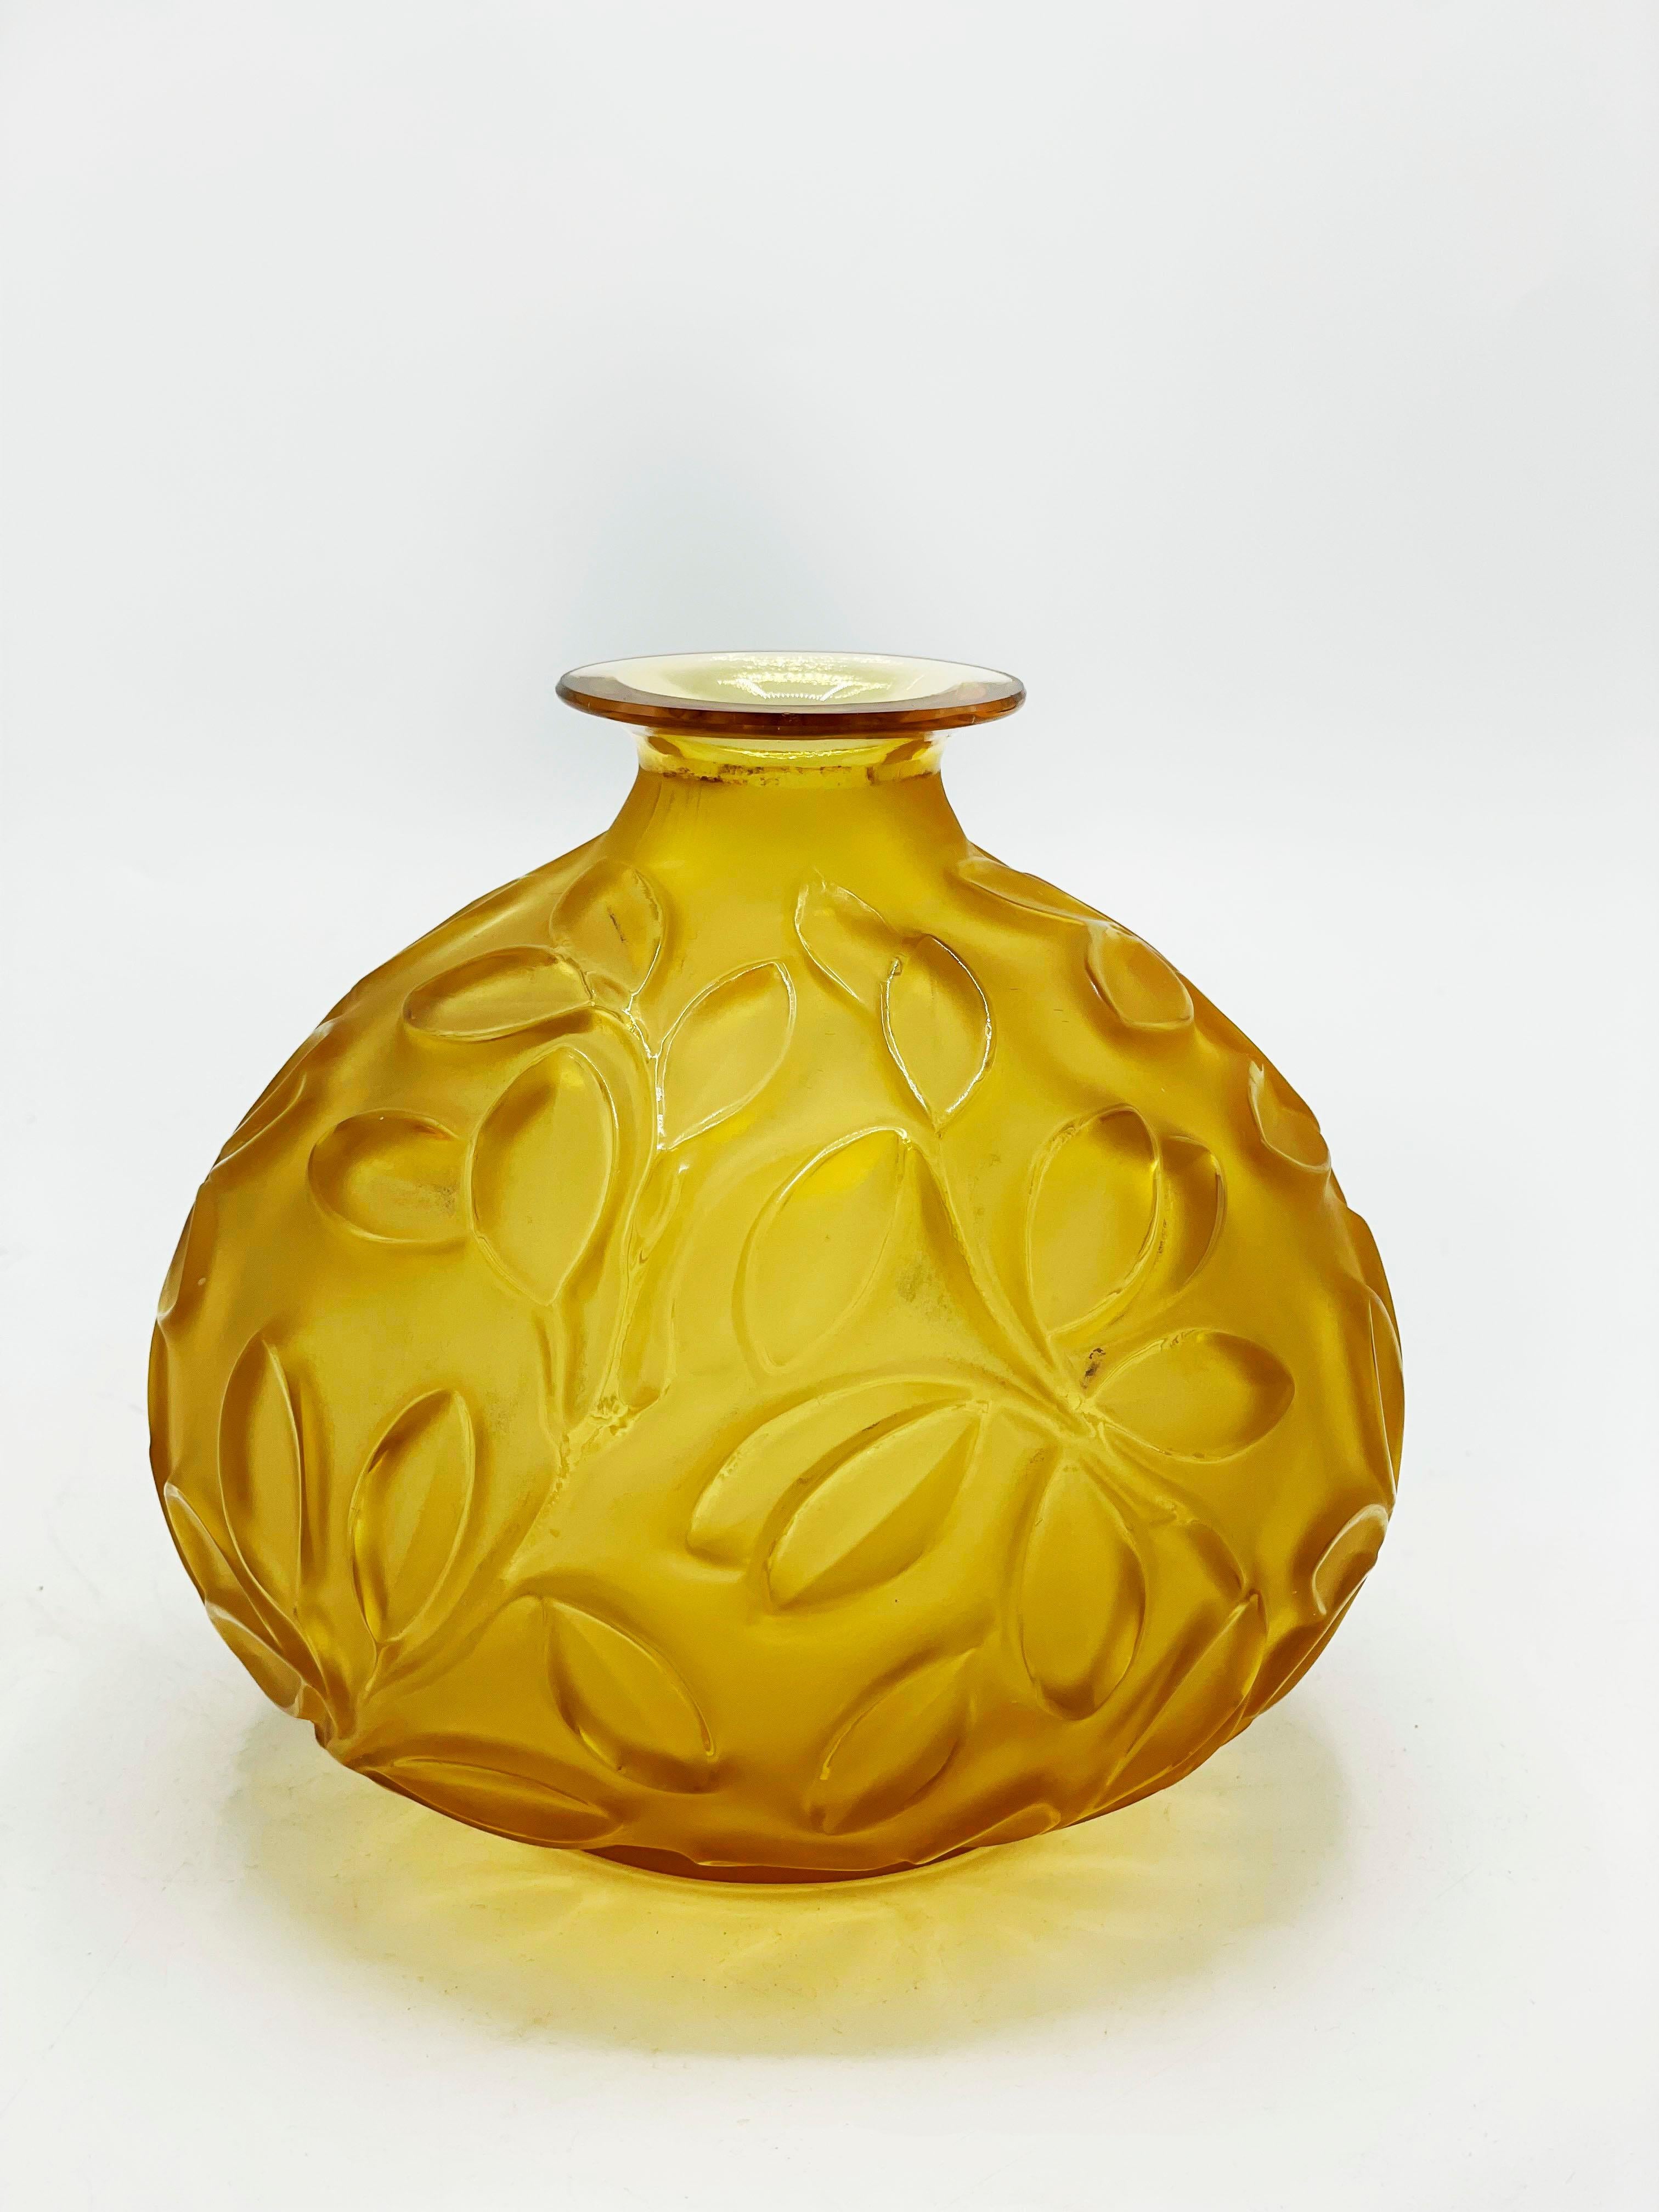 Sabino Art Deco Glass Vase
Beautiful Sabino vase in yellow glass with a design of branches with leaves that highlights it even more due to the relief.
Measures:
Height: 13 centimeters
Diameter: 12.5 centimeters